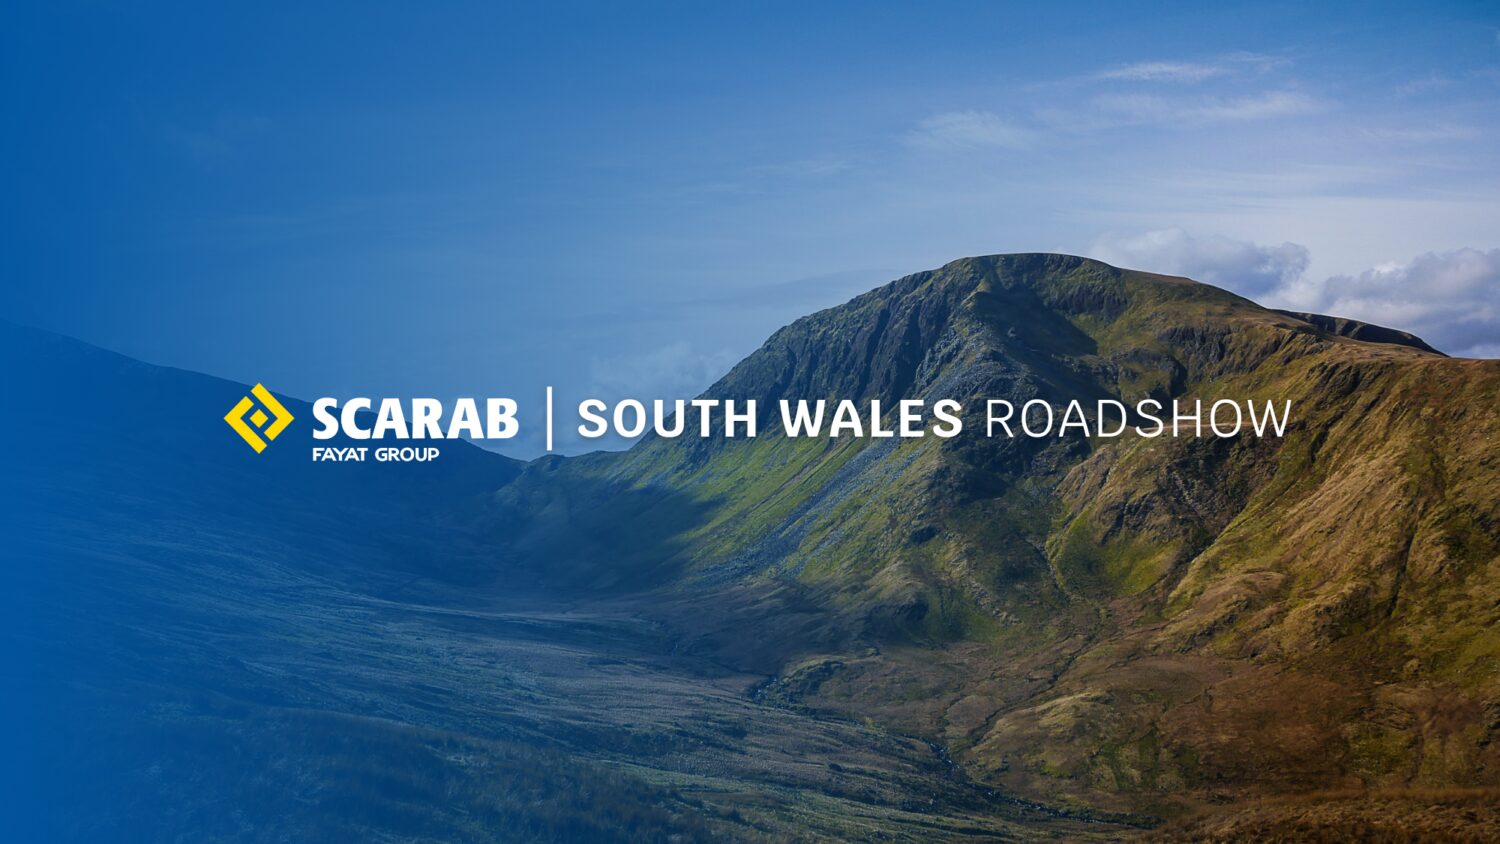 Join us at Scarab's South Wales Roadshow!